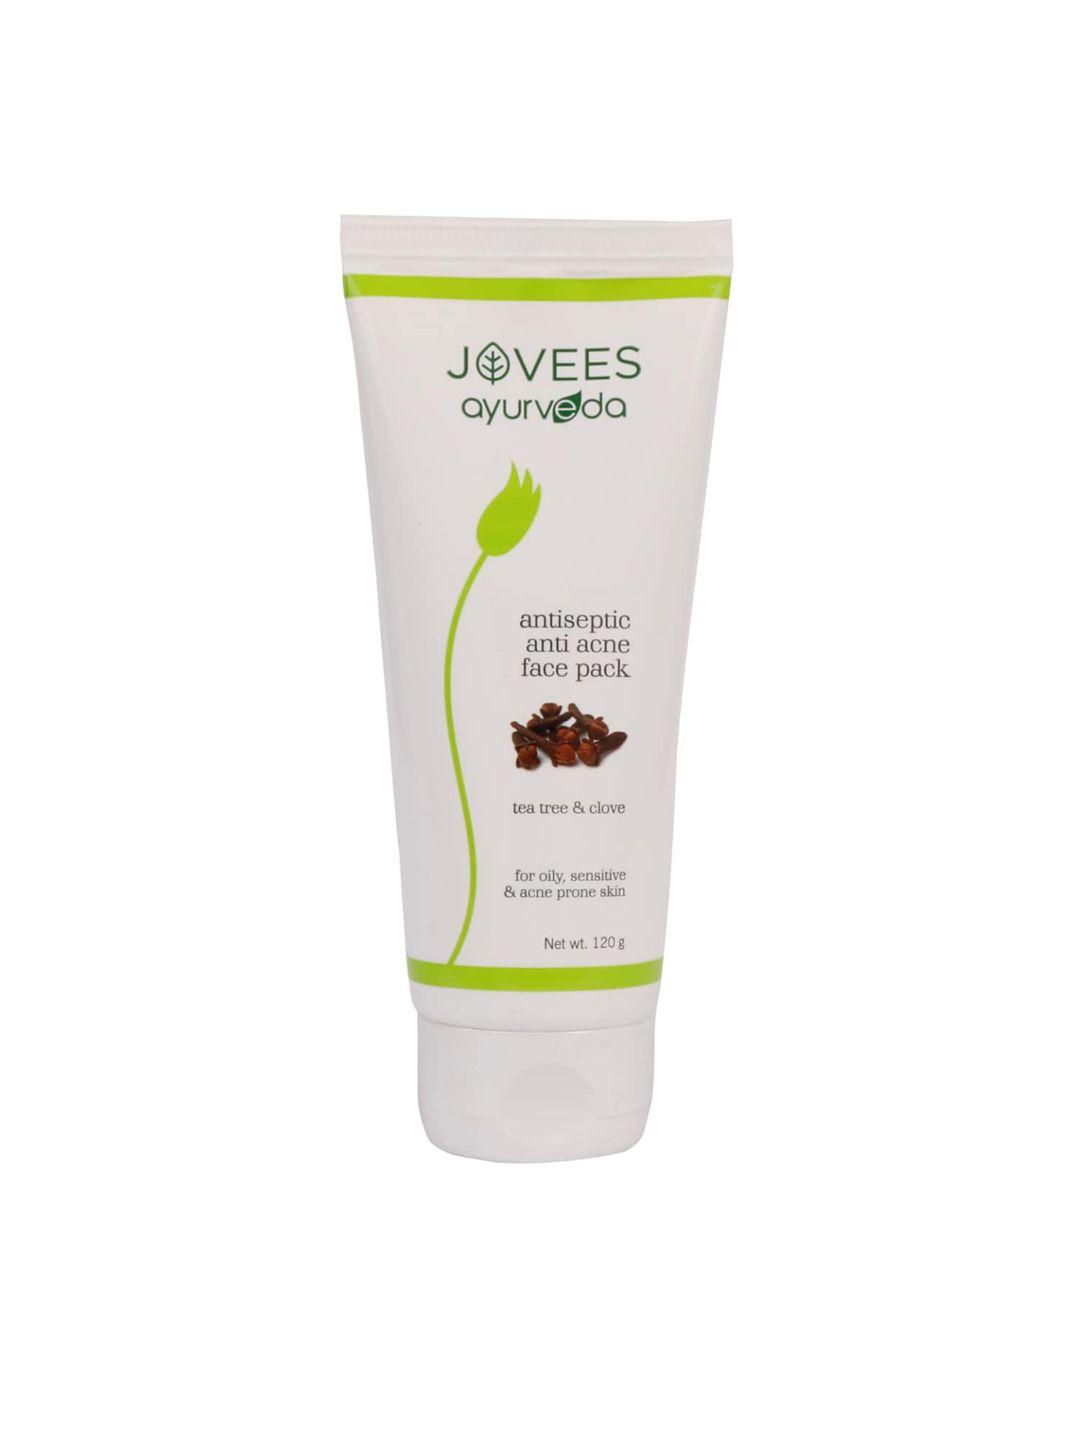 jovees antiseptic anti acne face pack with tea tree & clove - 120 g